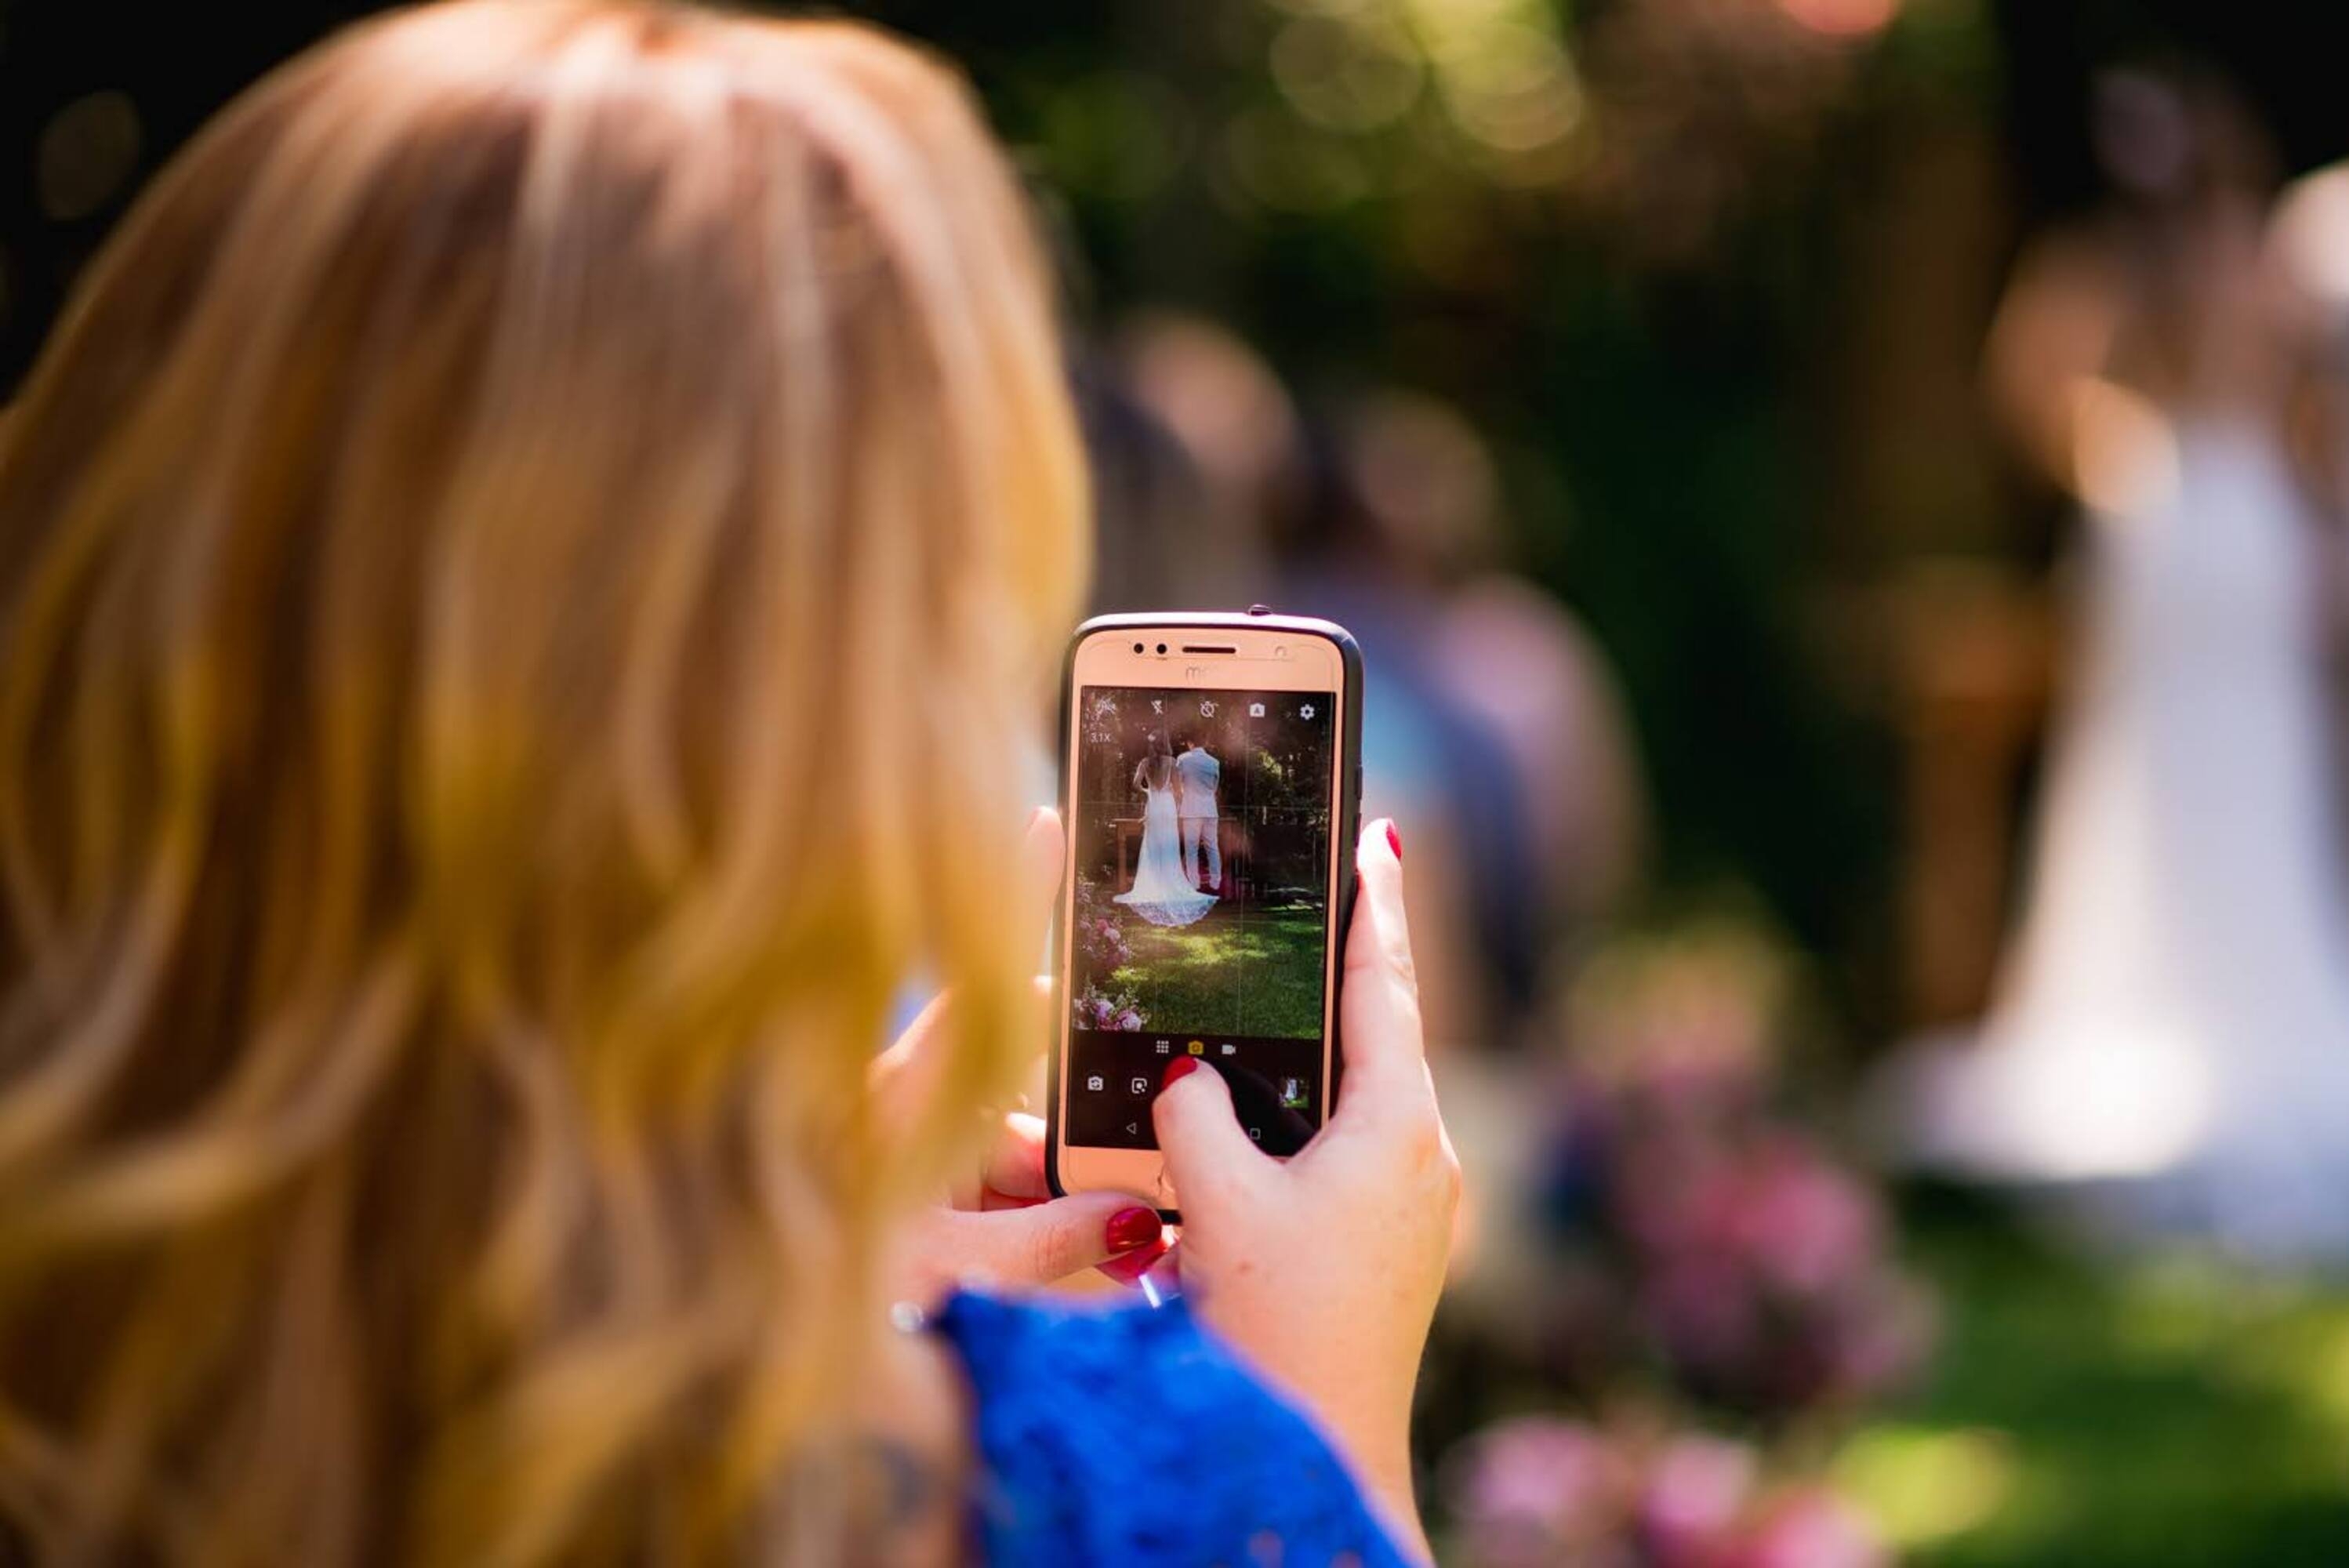 A woman taking a photo with her phone at a wedding | Source: Shutterstock